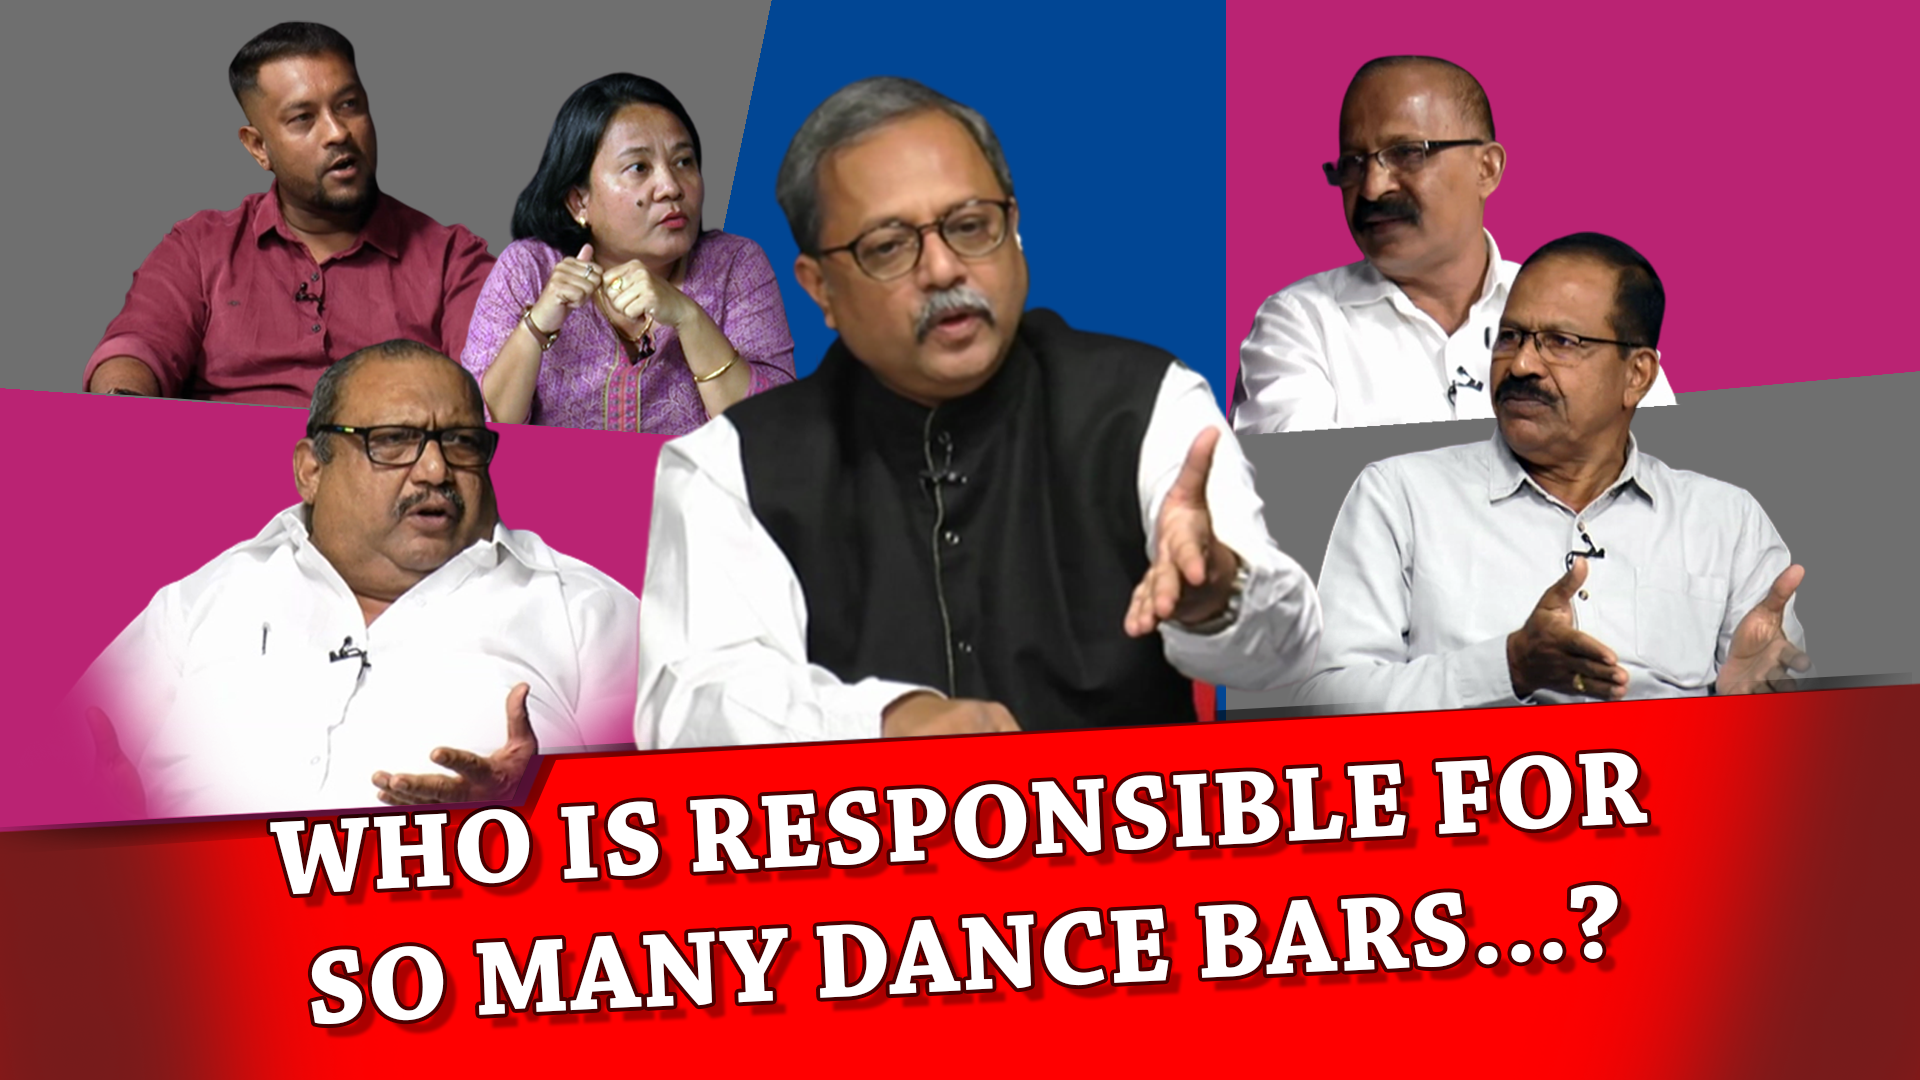 WHO IS RESPONSIBLE FOR SO MANY DANCE BARS?